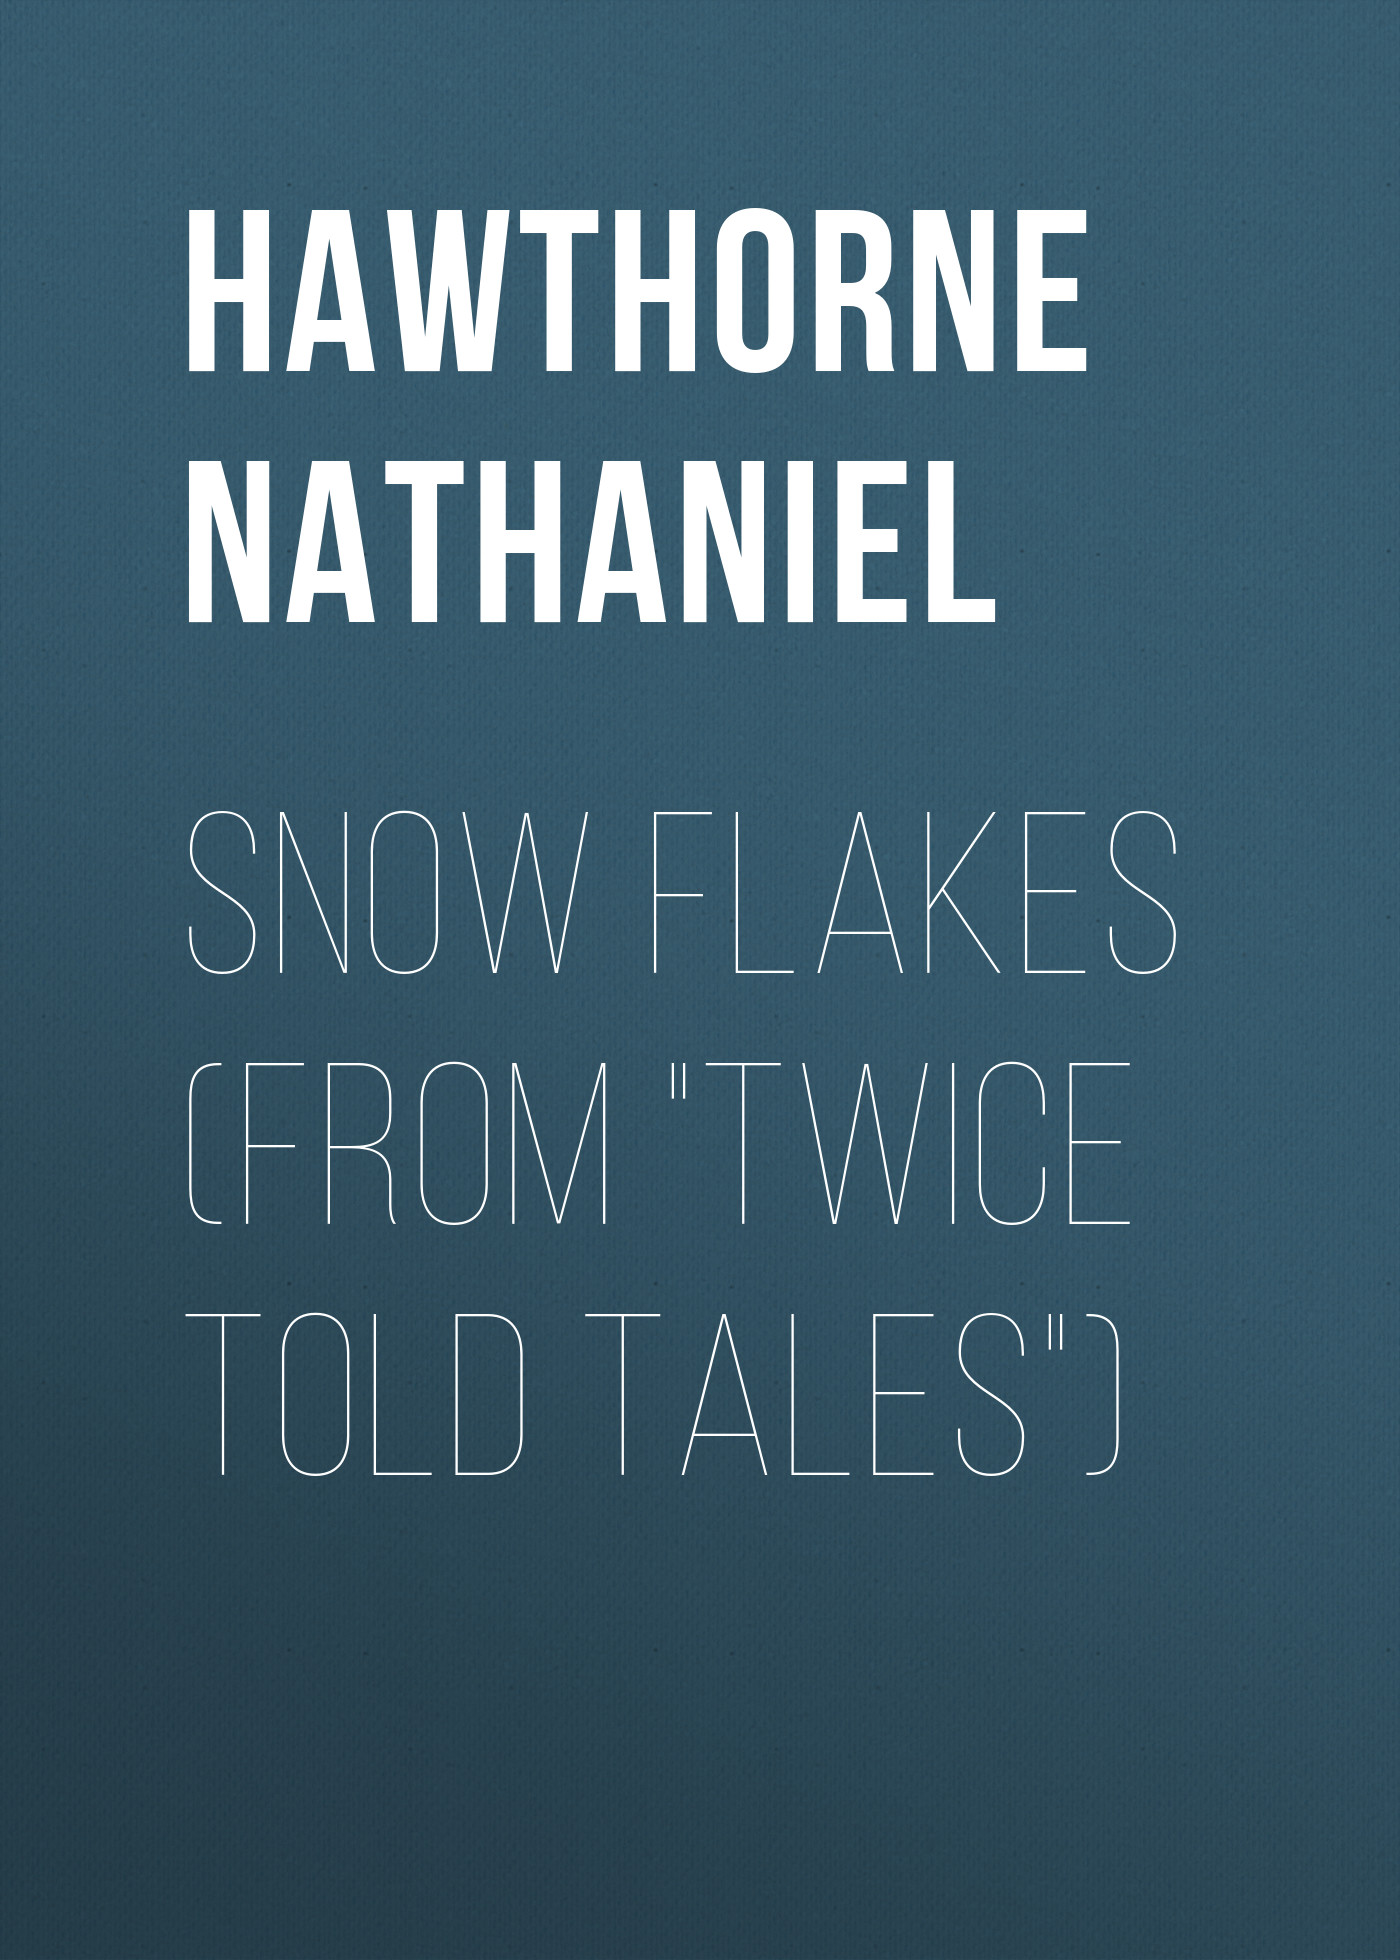 Snow Flakes (From"Twice Told Tales")